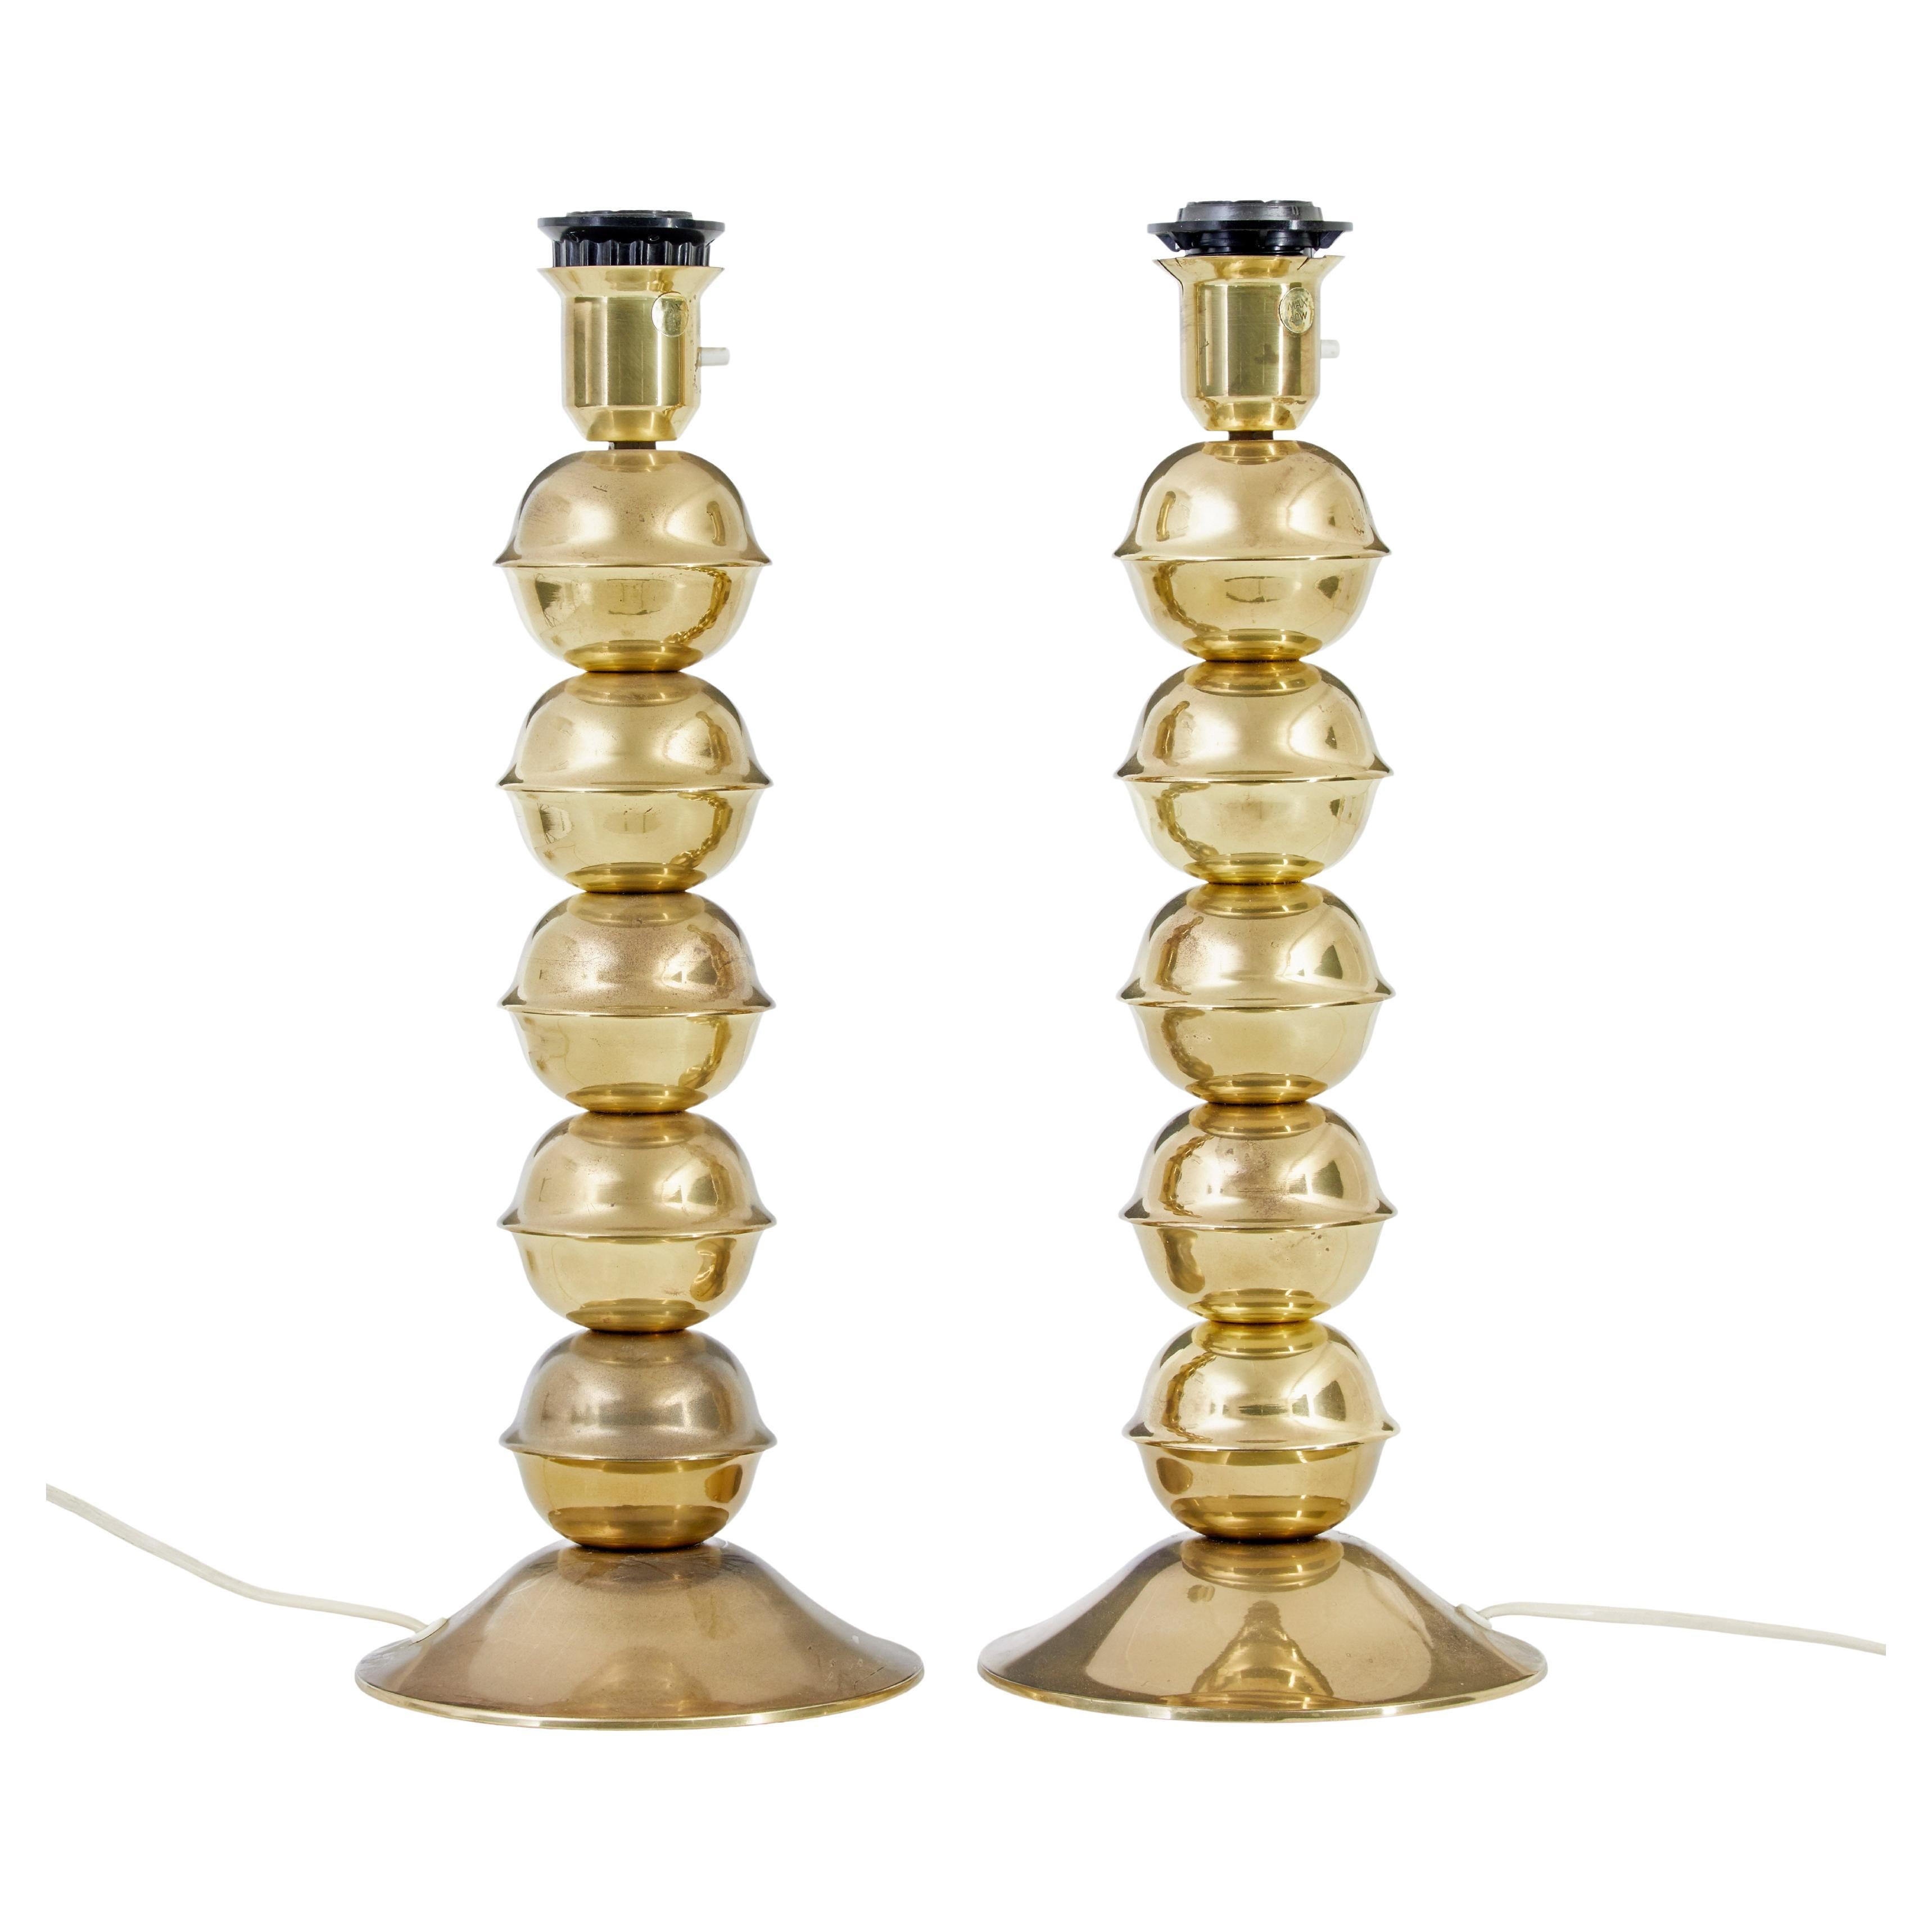 Pair of 1970’s brass table lamps by Elamatur Kosta